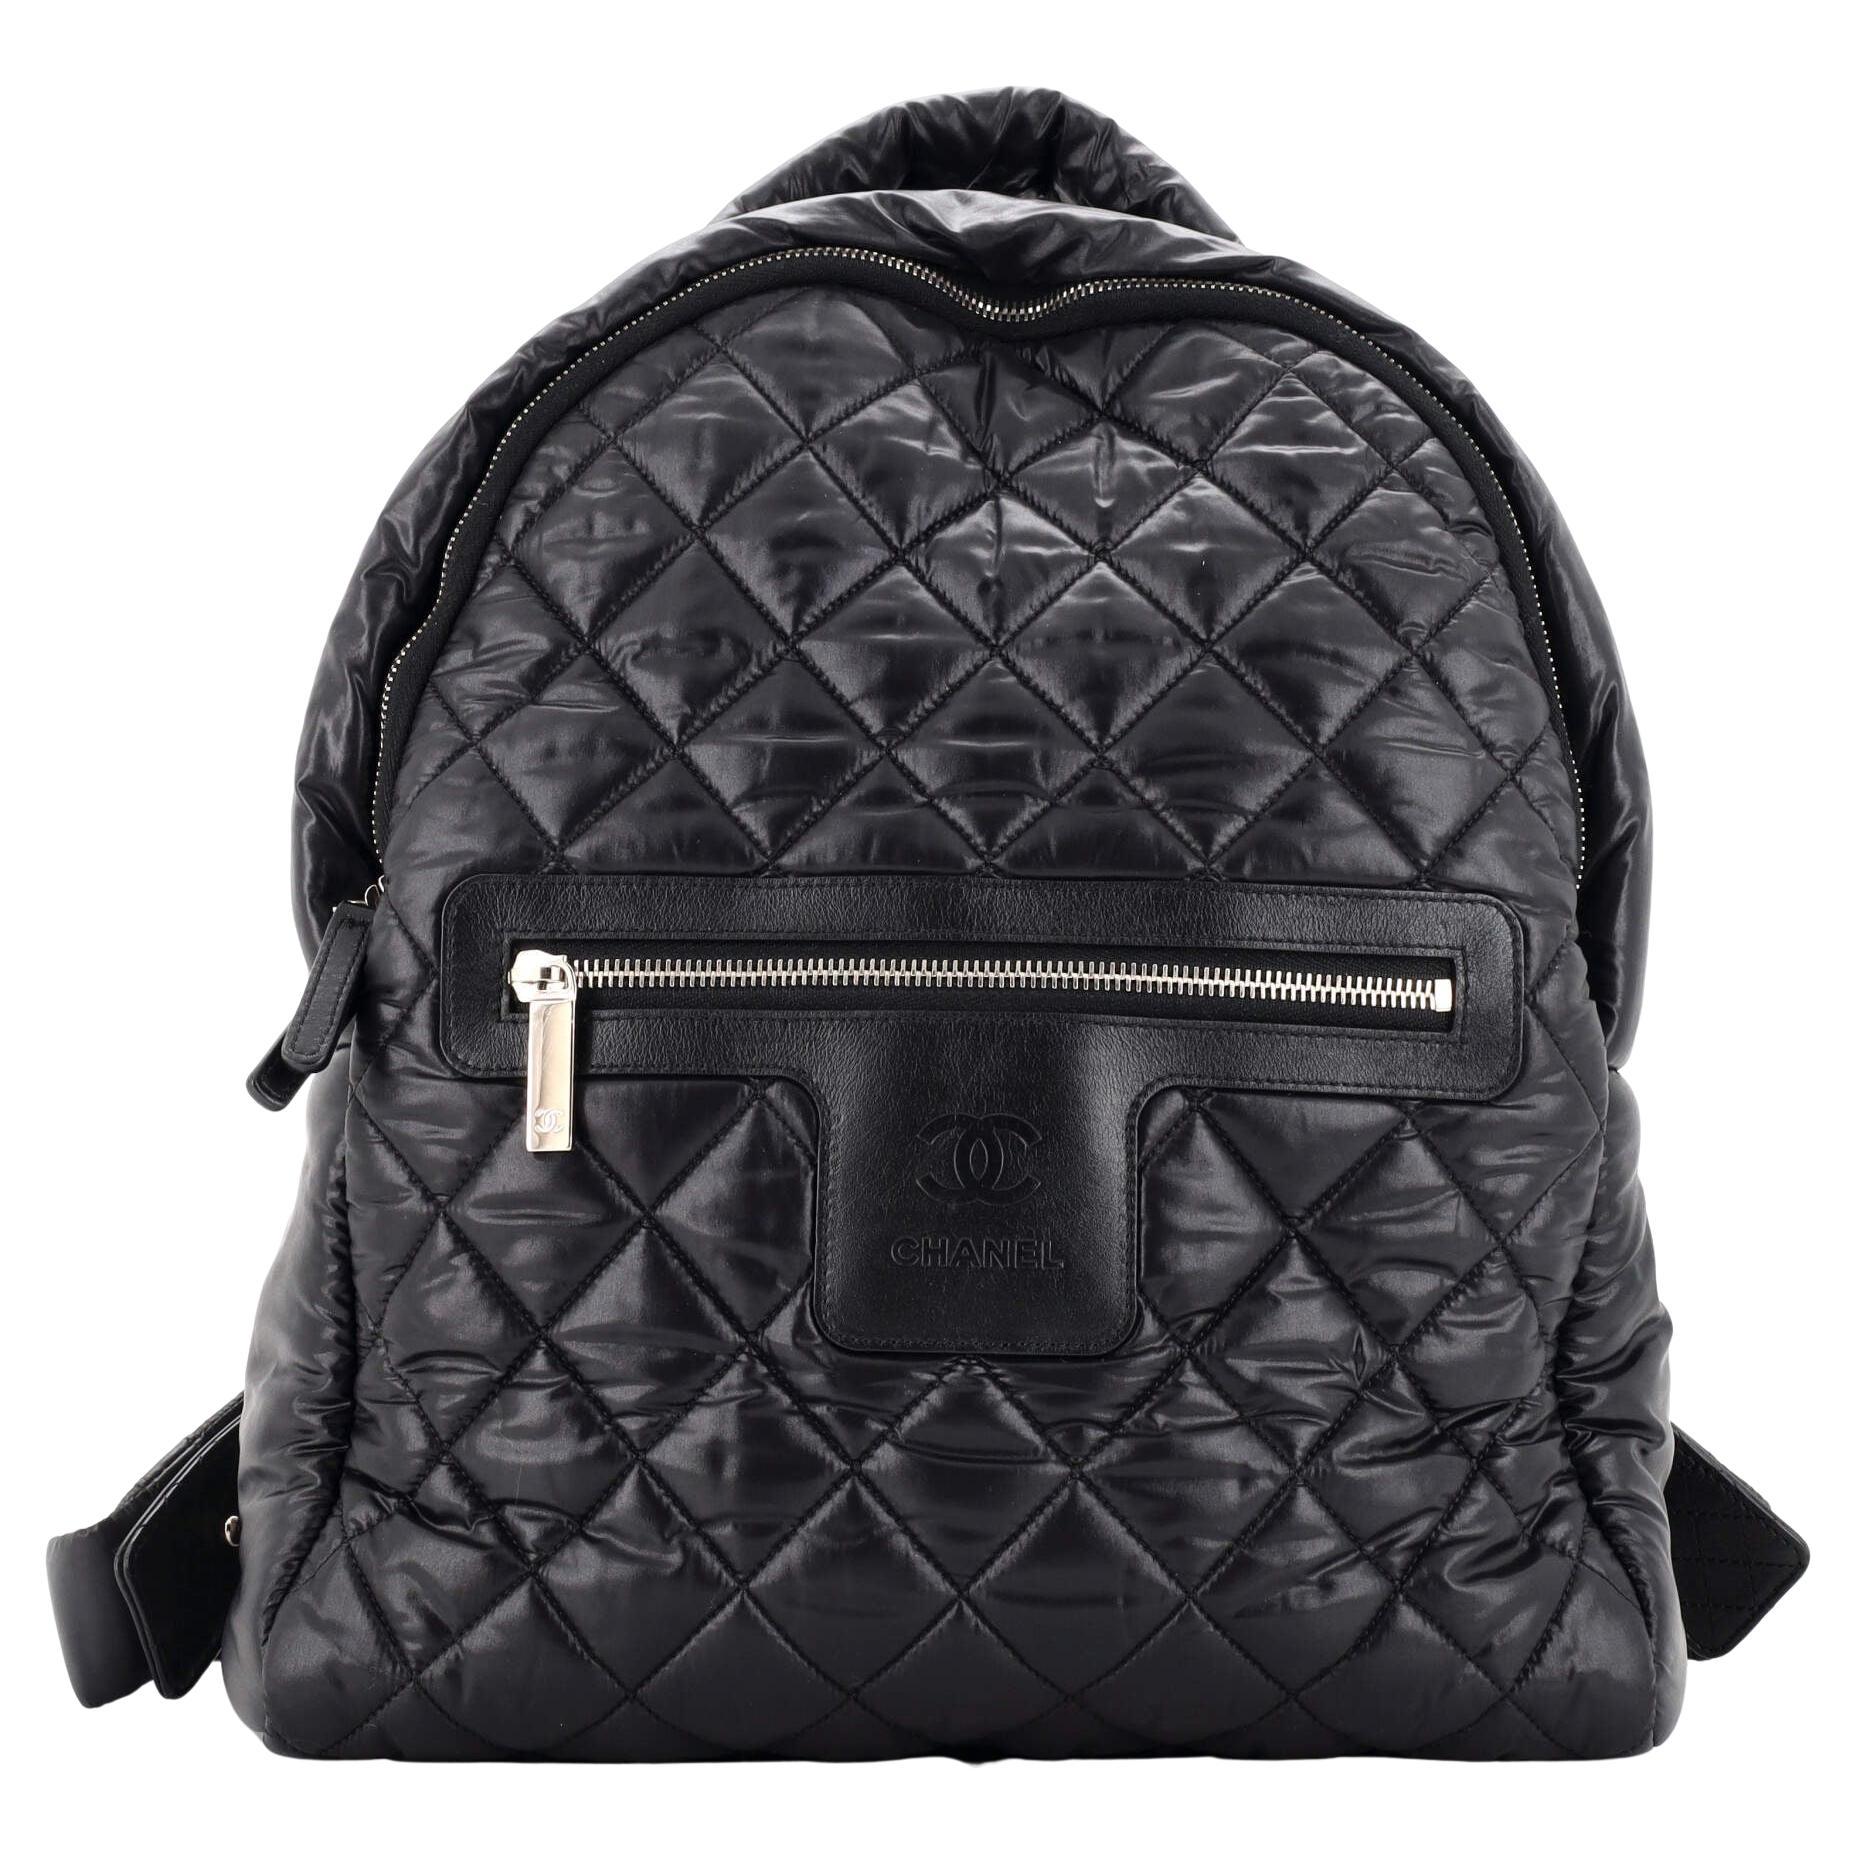 Chanel Blue Nylon Coco Neige Convertible Backpack Silver Hardware, 2021  Available For Immediate Sale At Sotheby's